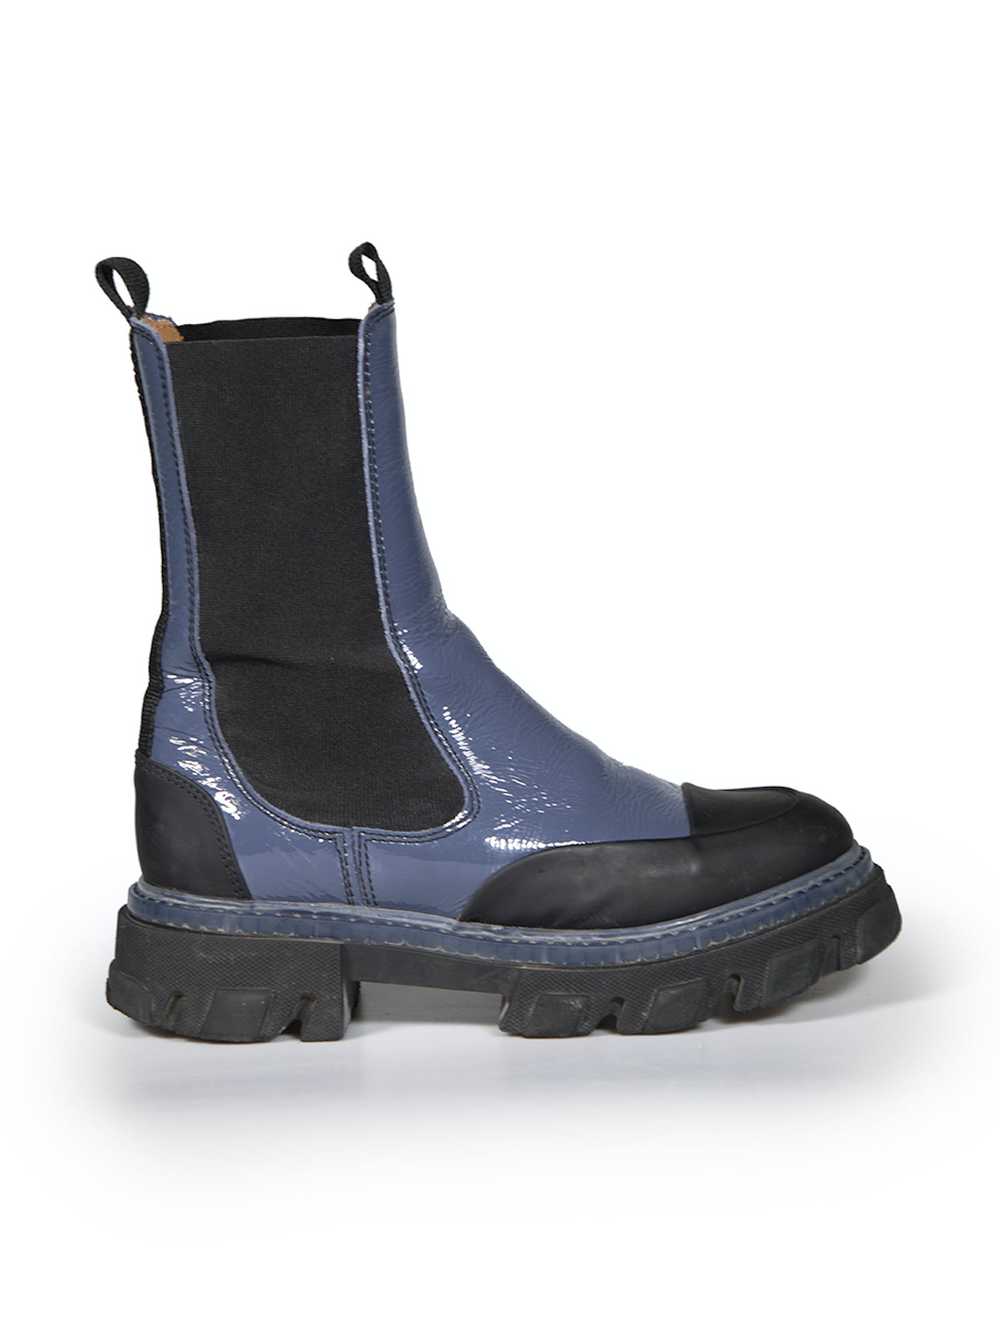 Ganni Blue Patent Leather Mid Chelsea Boots - image 1